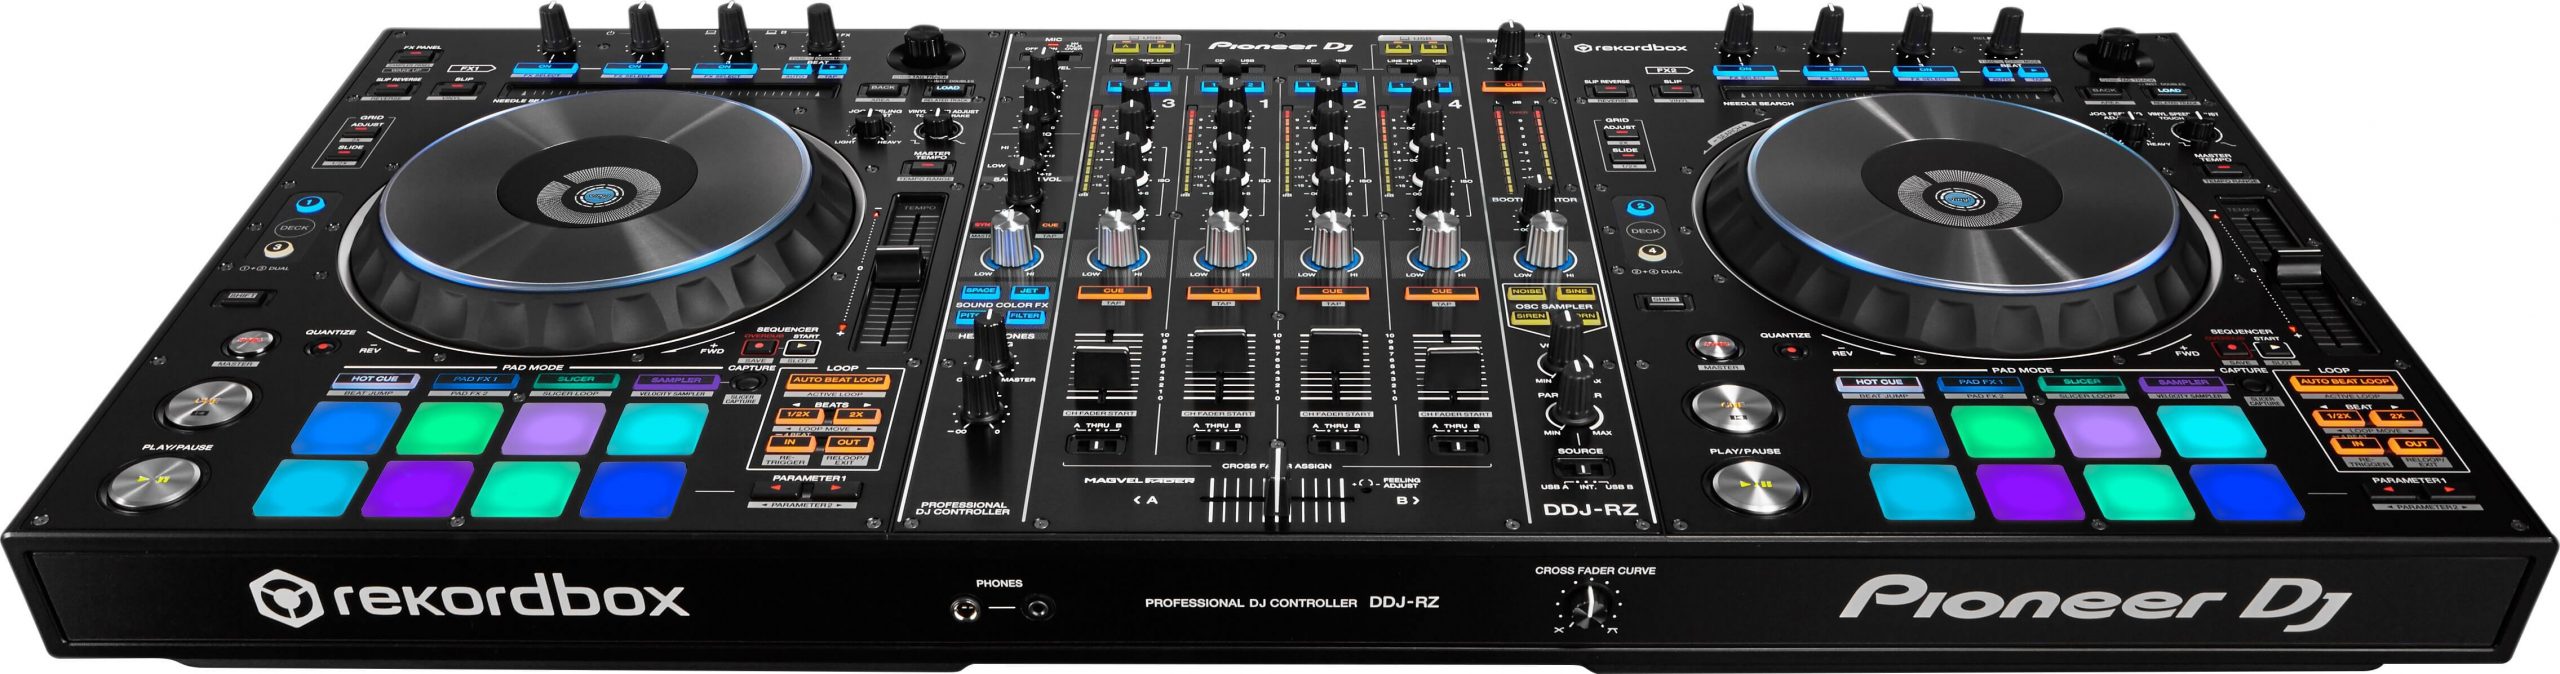 how much is pioneer dj mixer